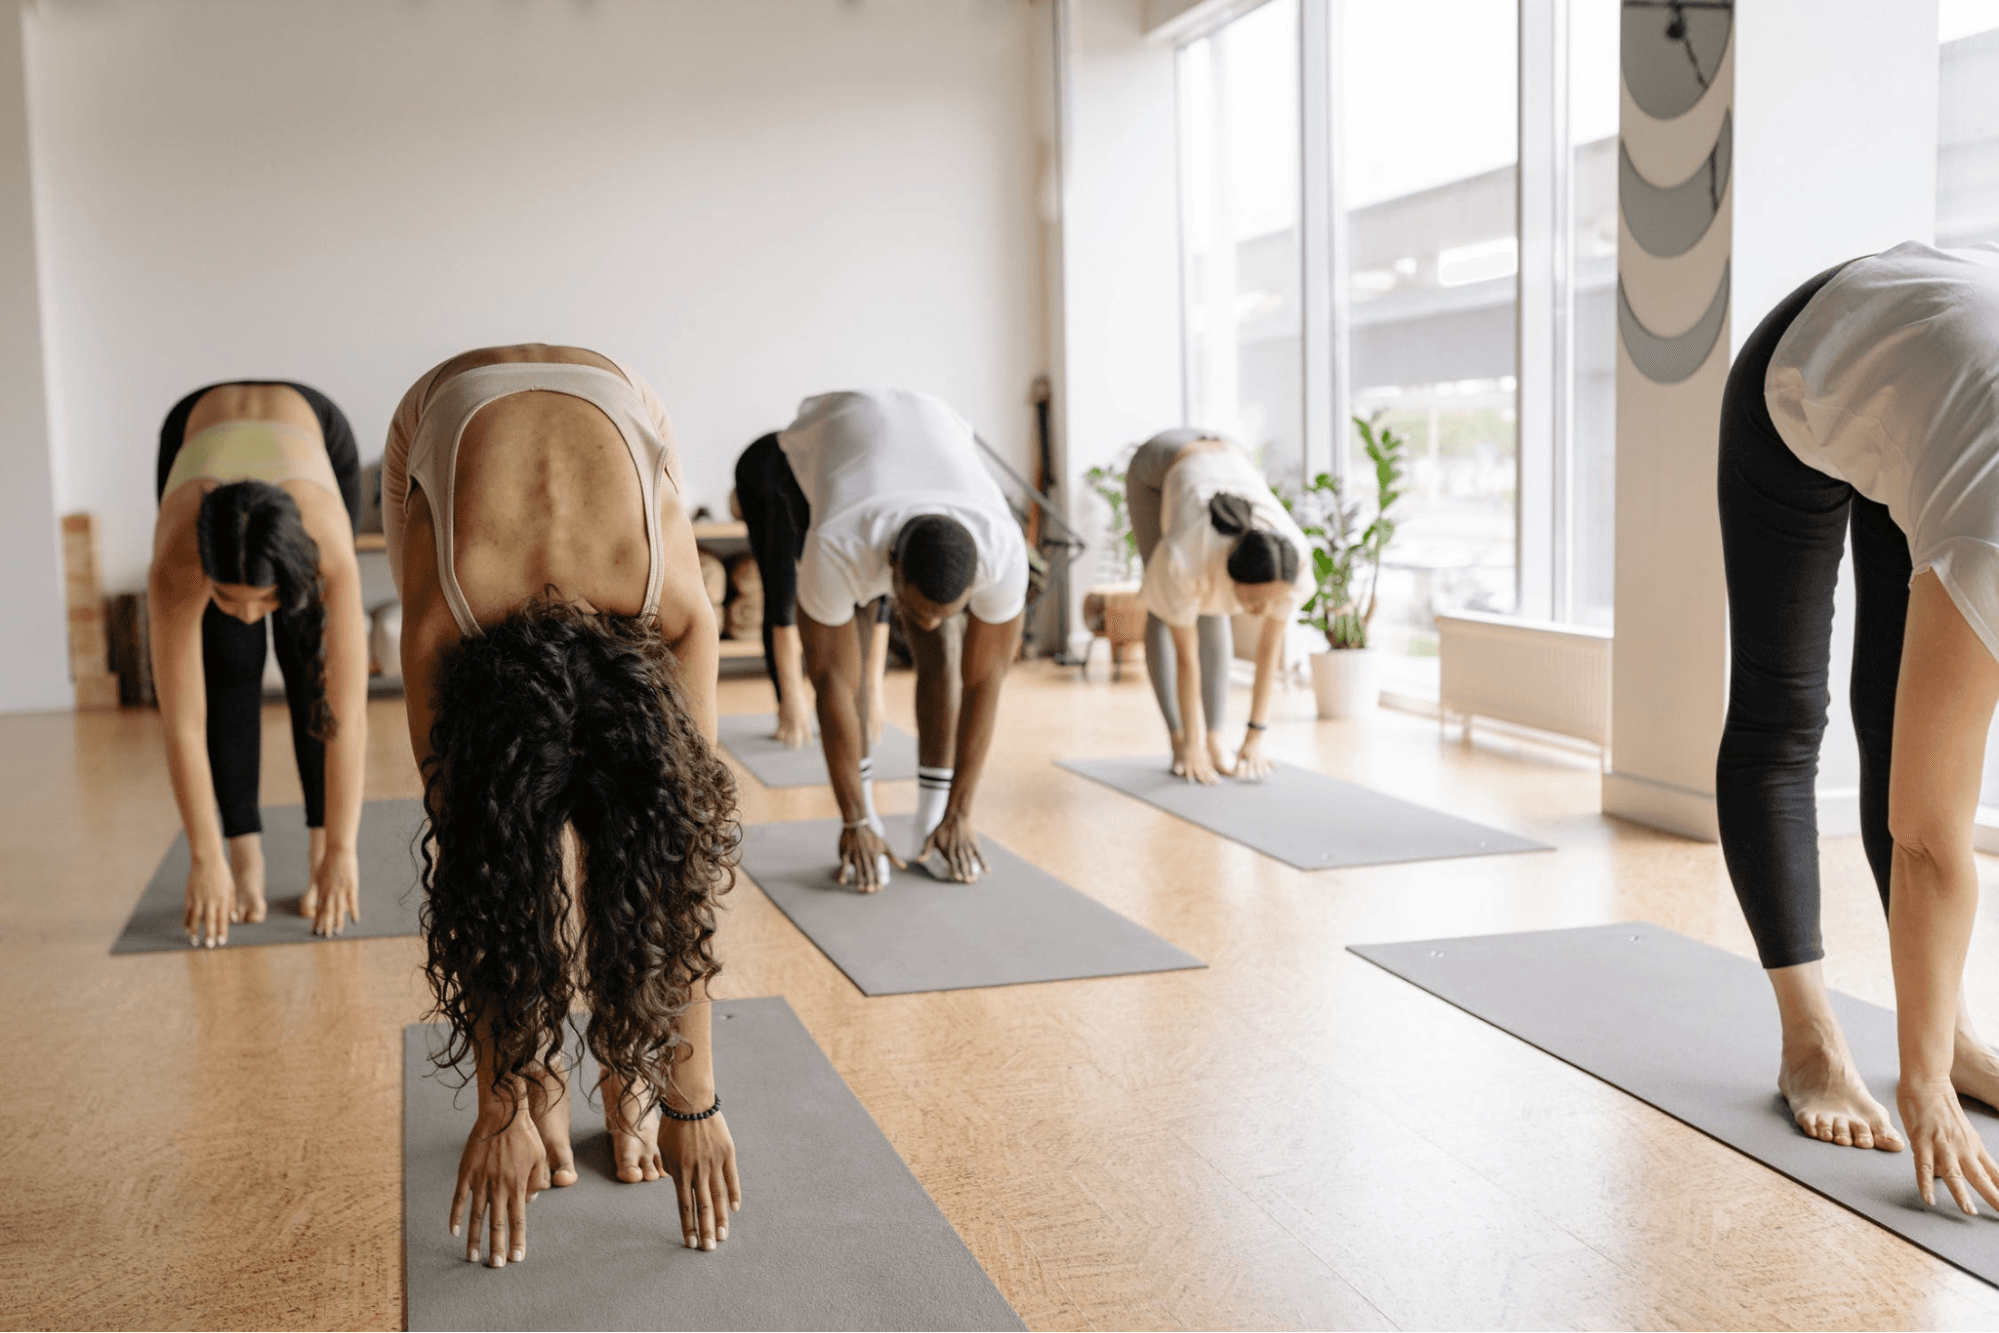 A group of five people are doing yoga in a spacious, light-filled studio. They are all on gray yoga mats and in workout clothes while they are stretching.